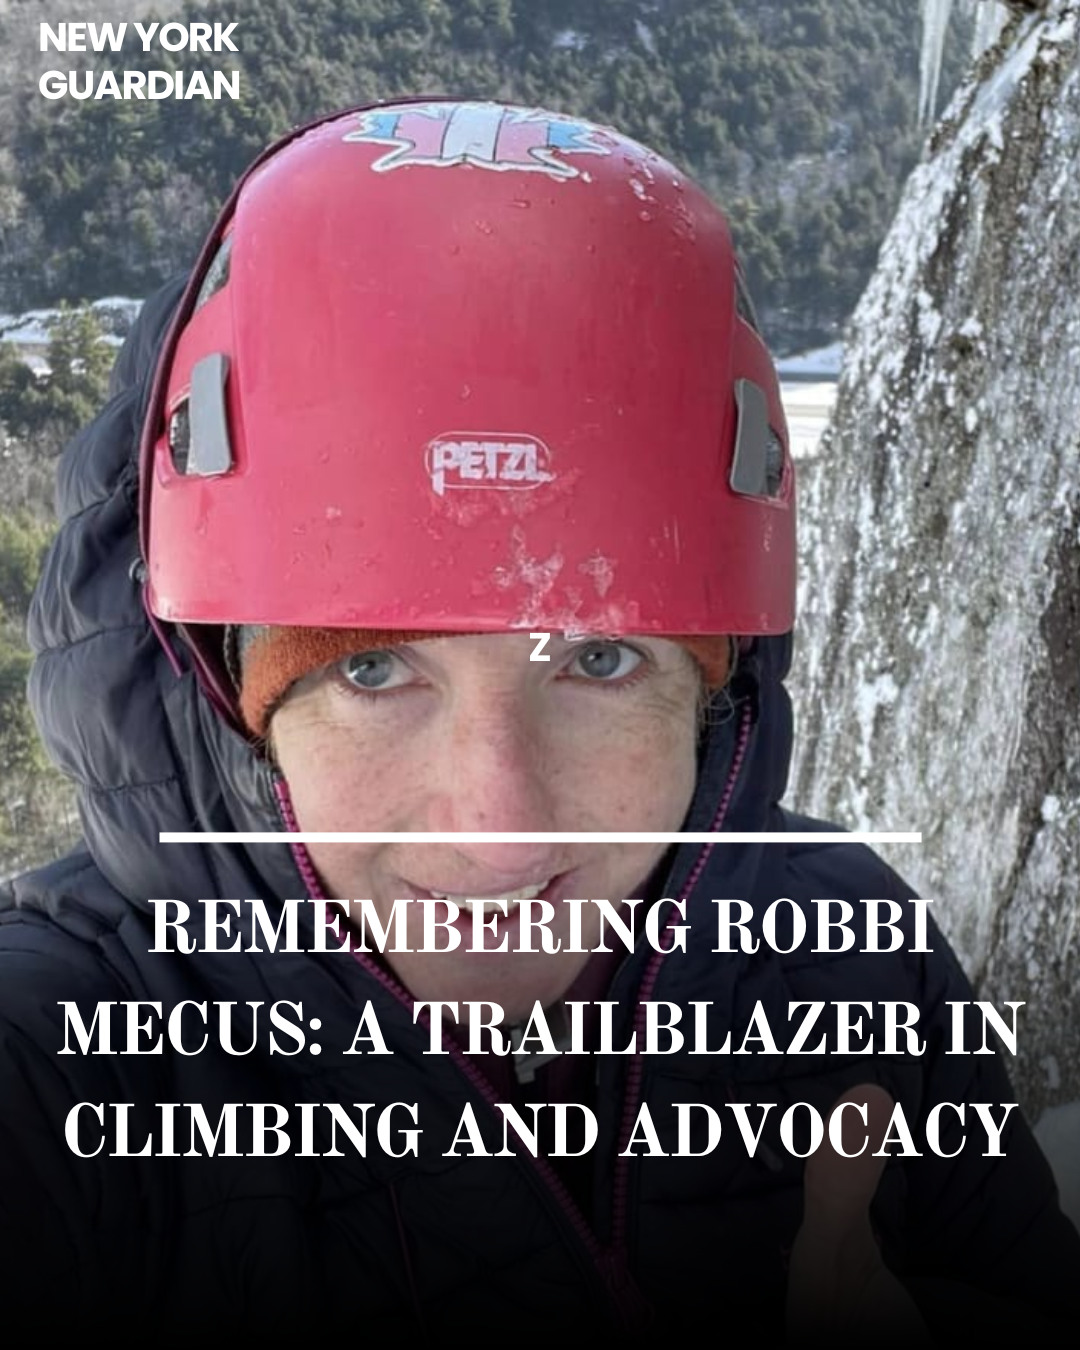 Robbi Mecus is a beloved personality in the climbing community and a dedicated champion for transgender inclusion in alpine sports.